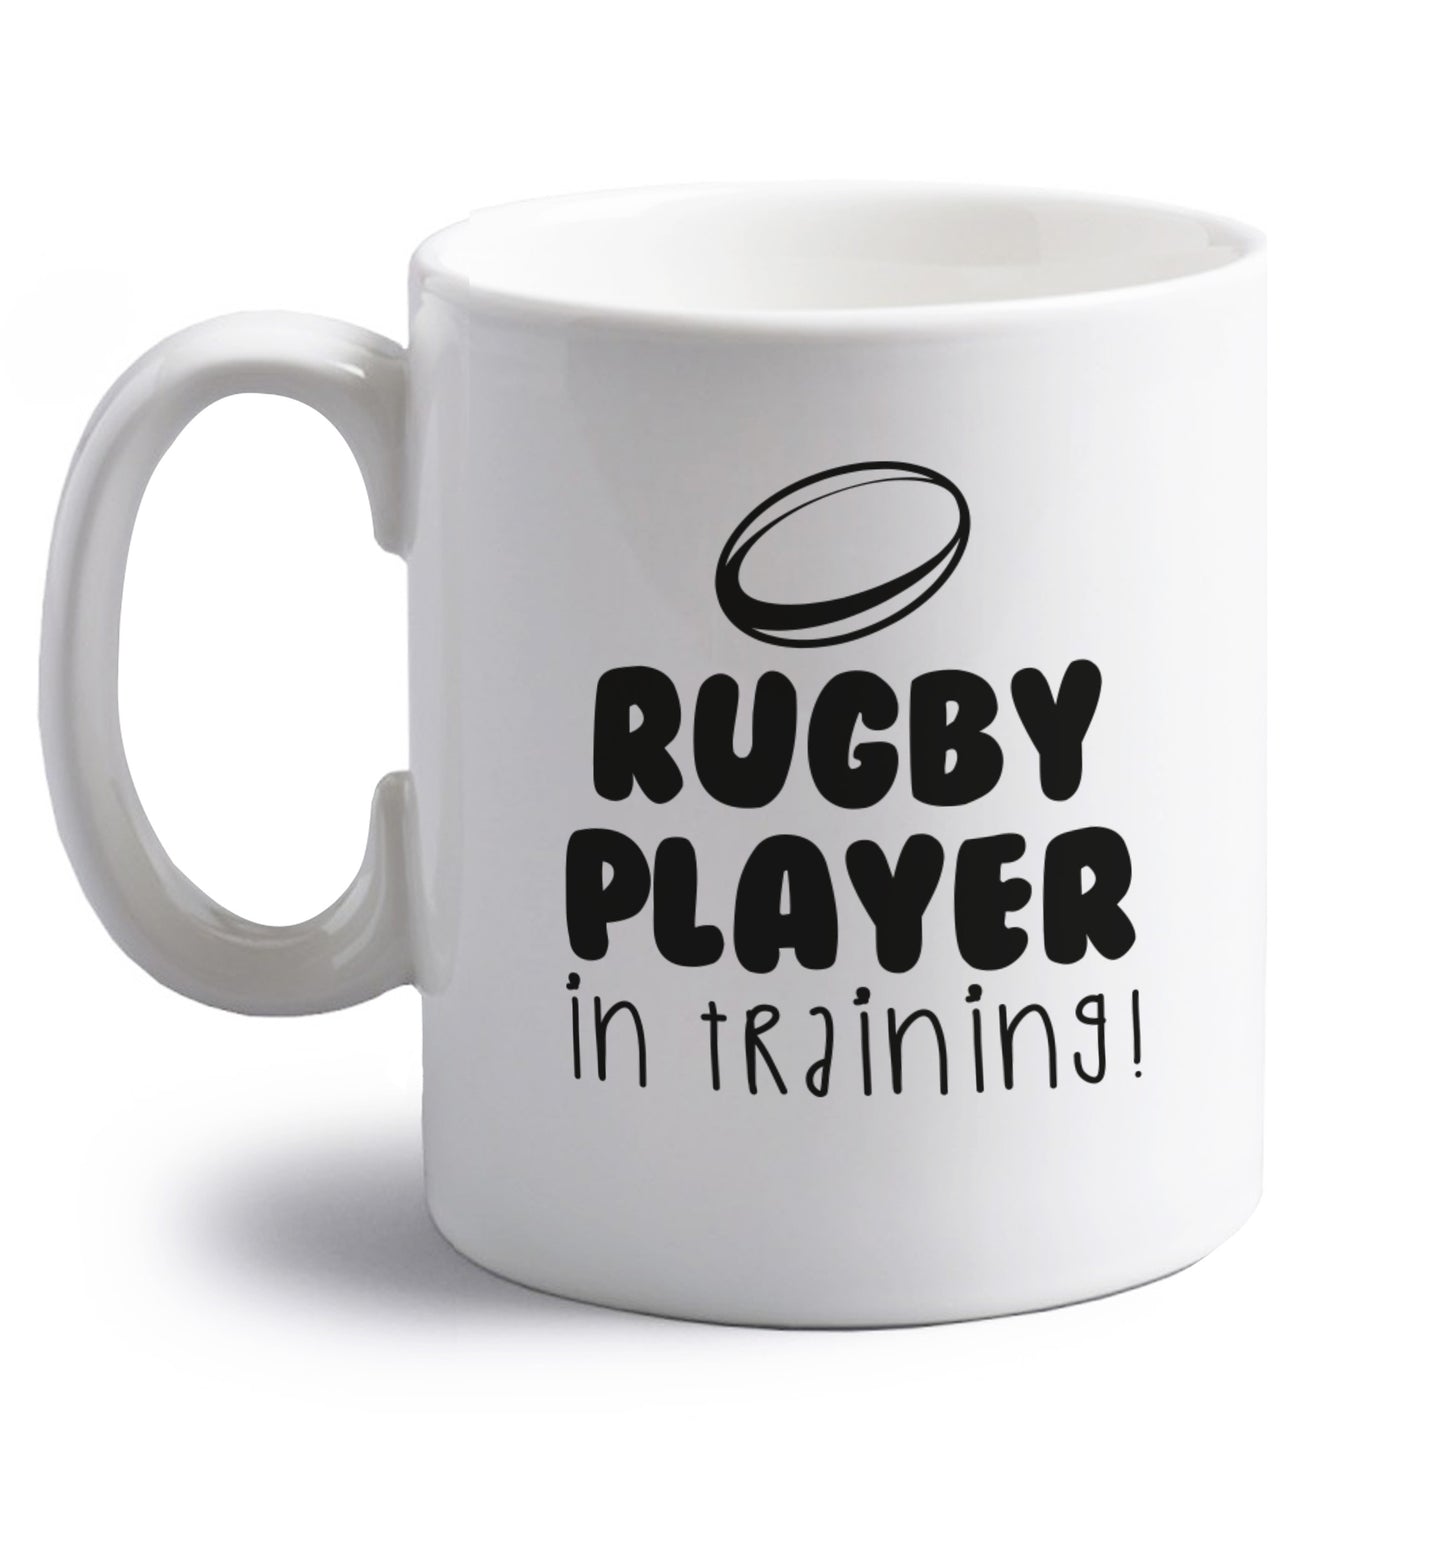 Rugby player in training right handed white ceramic mug 